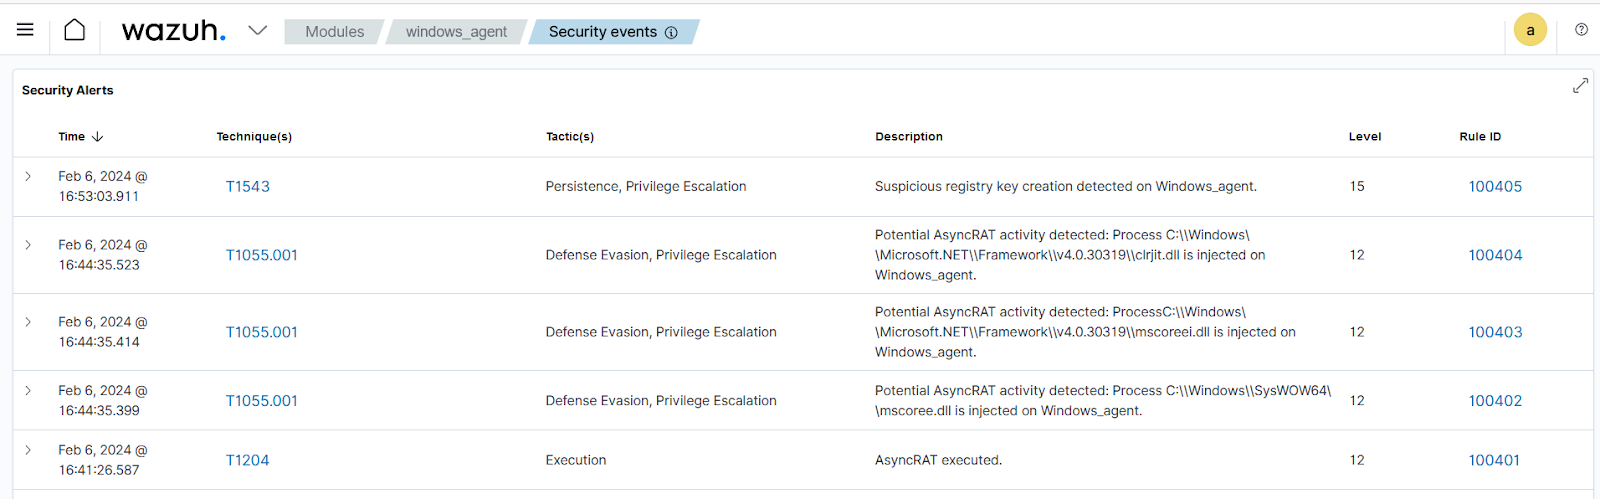 AsyncRAT security events